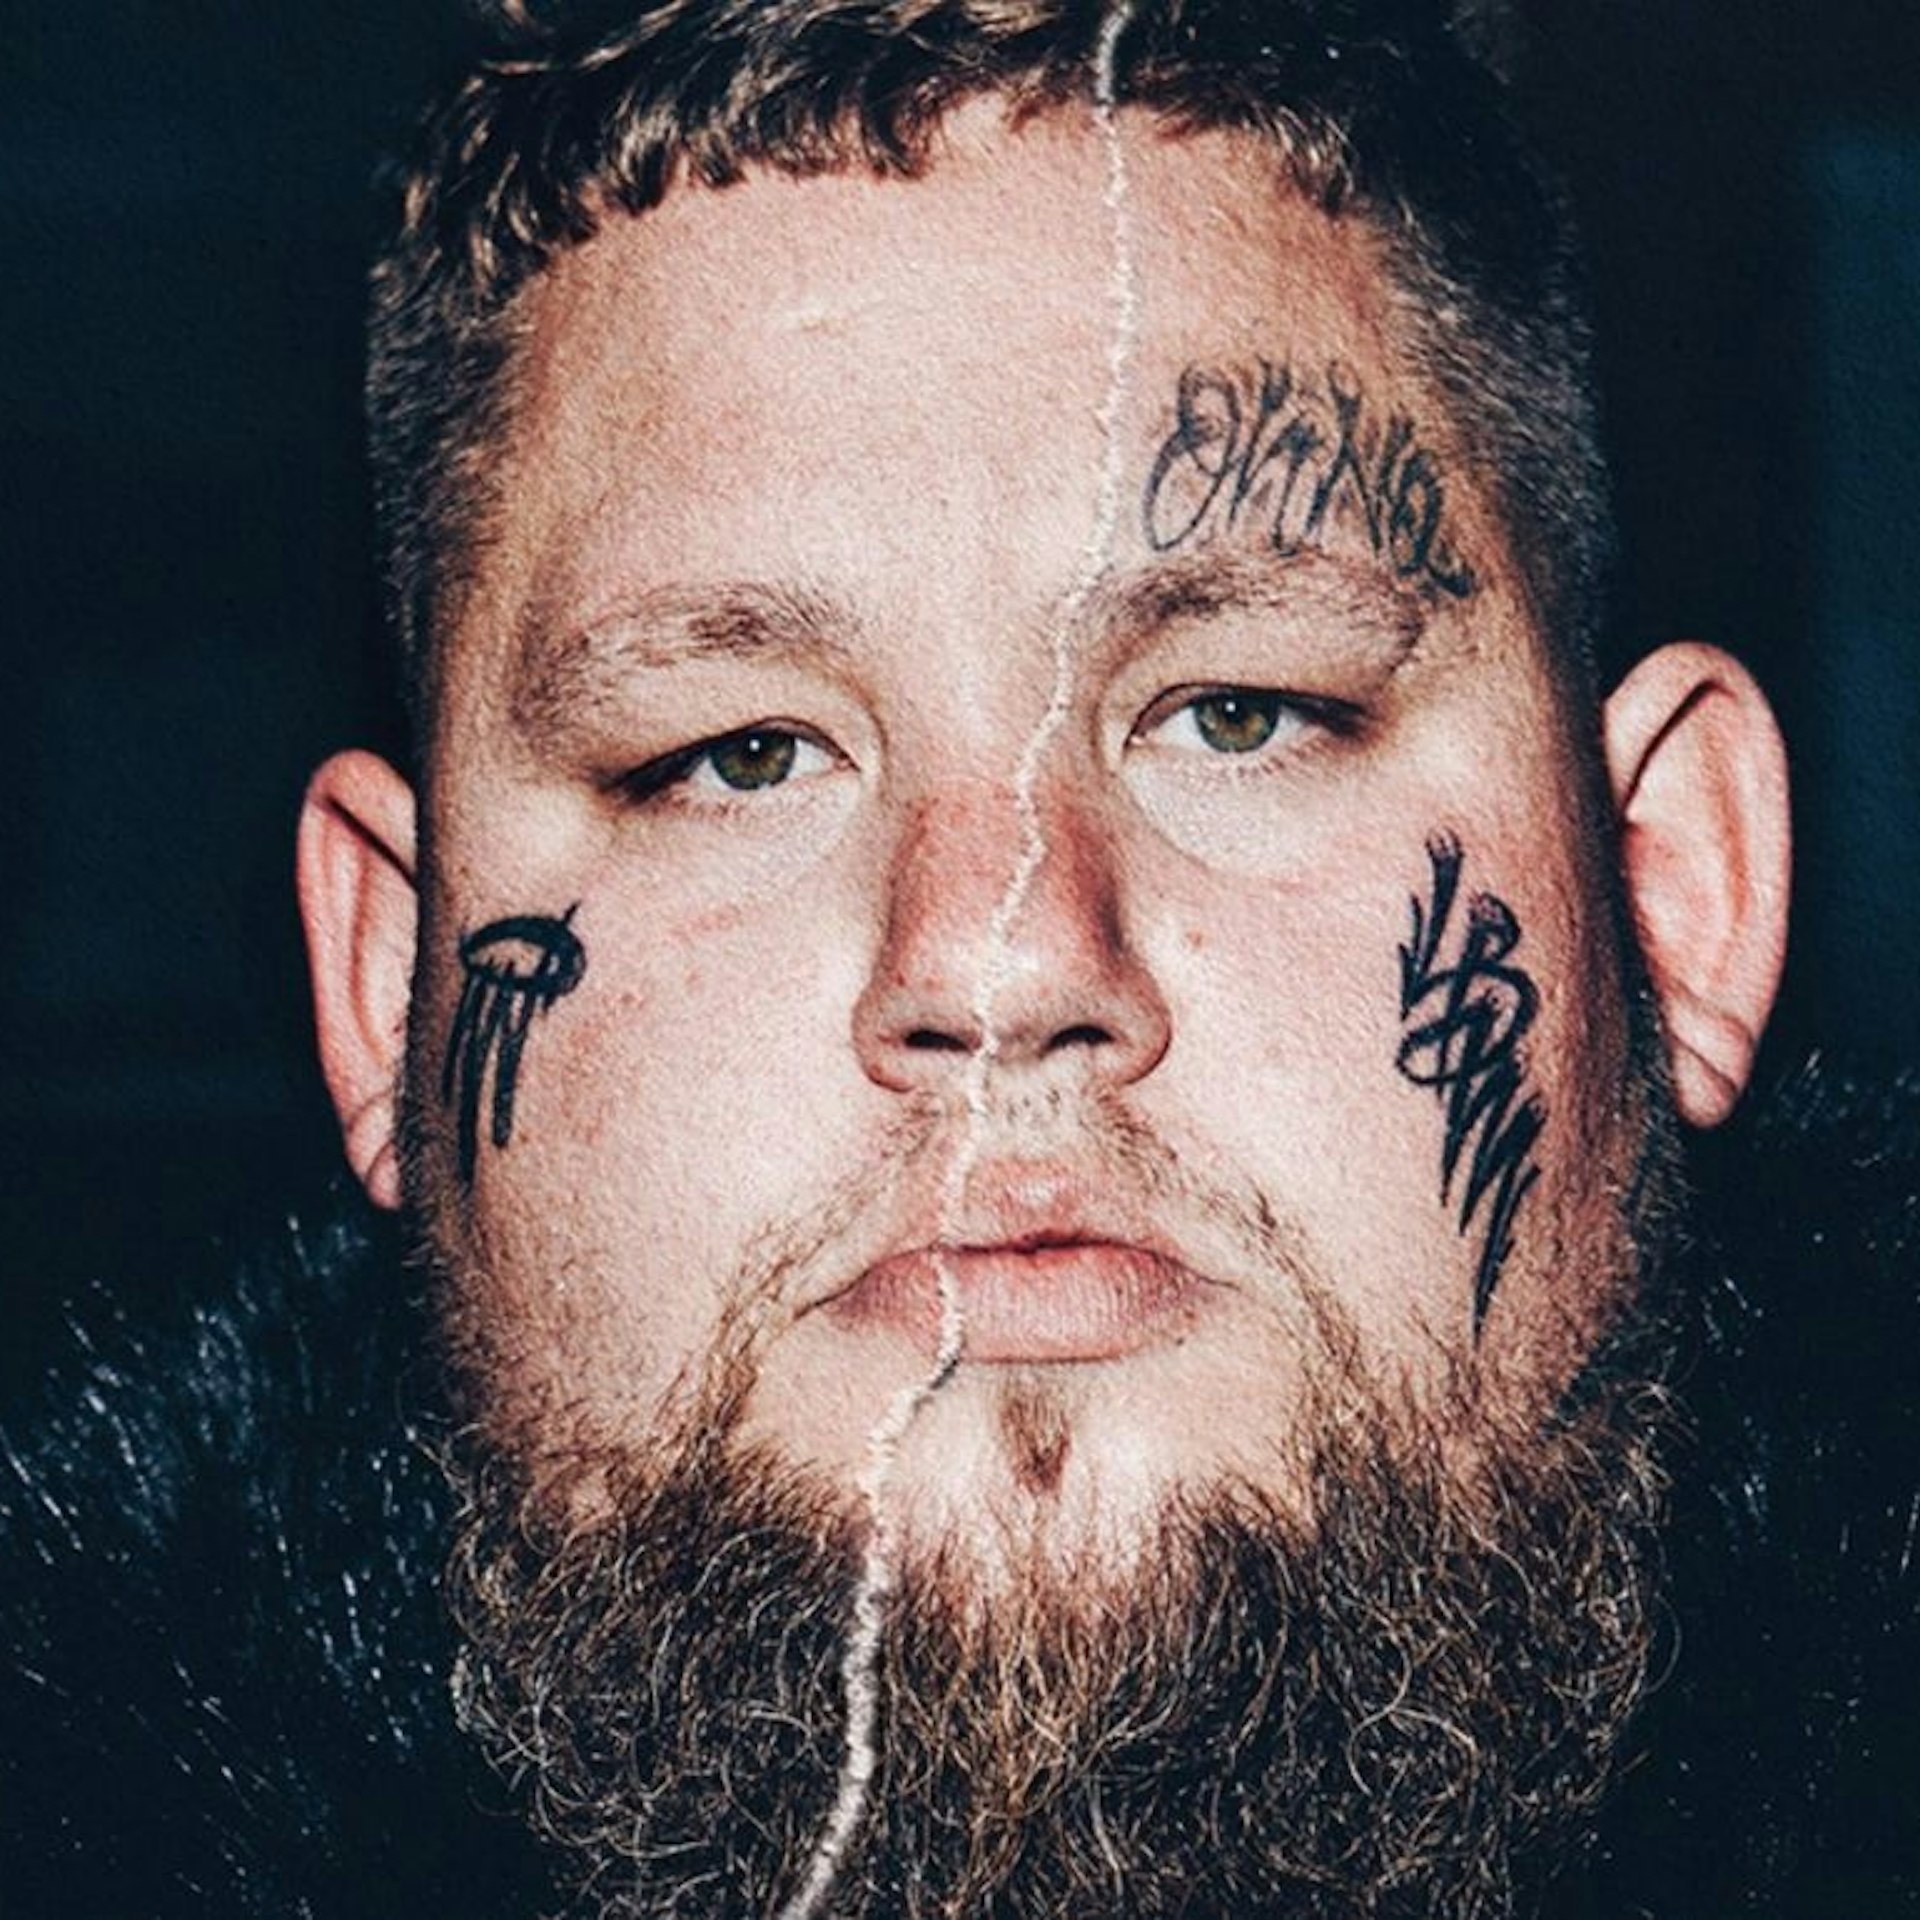 Rag'n'Bone Man: Human review – all sorts of rootsy goodness, Pop and rock